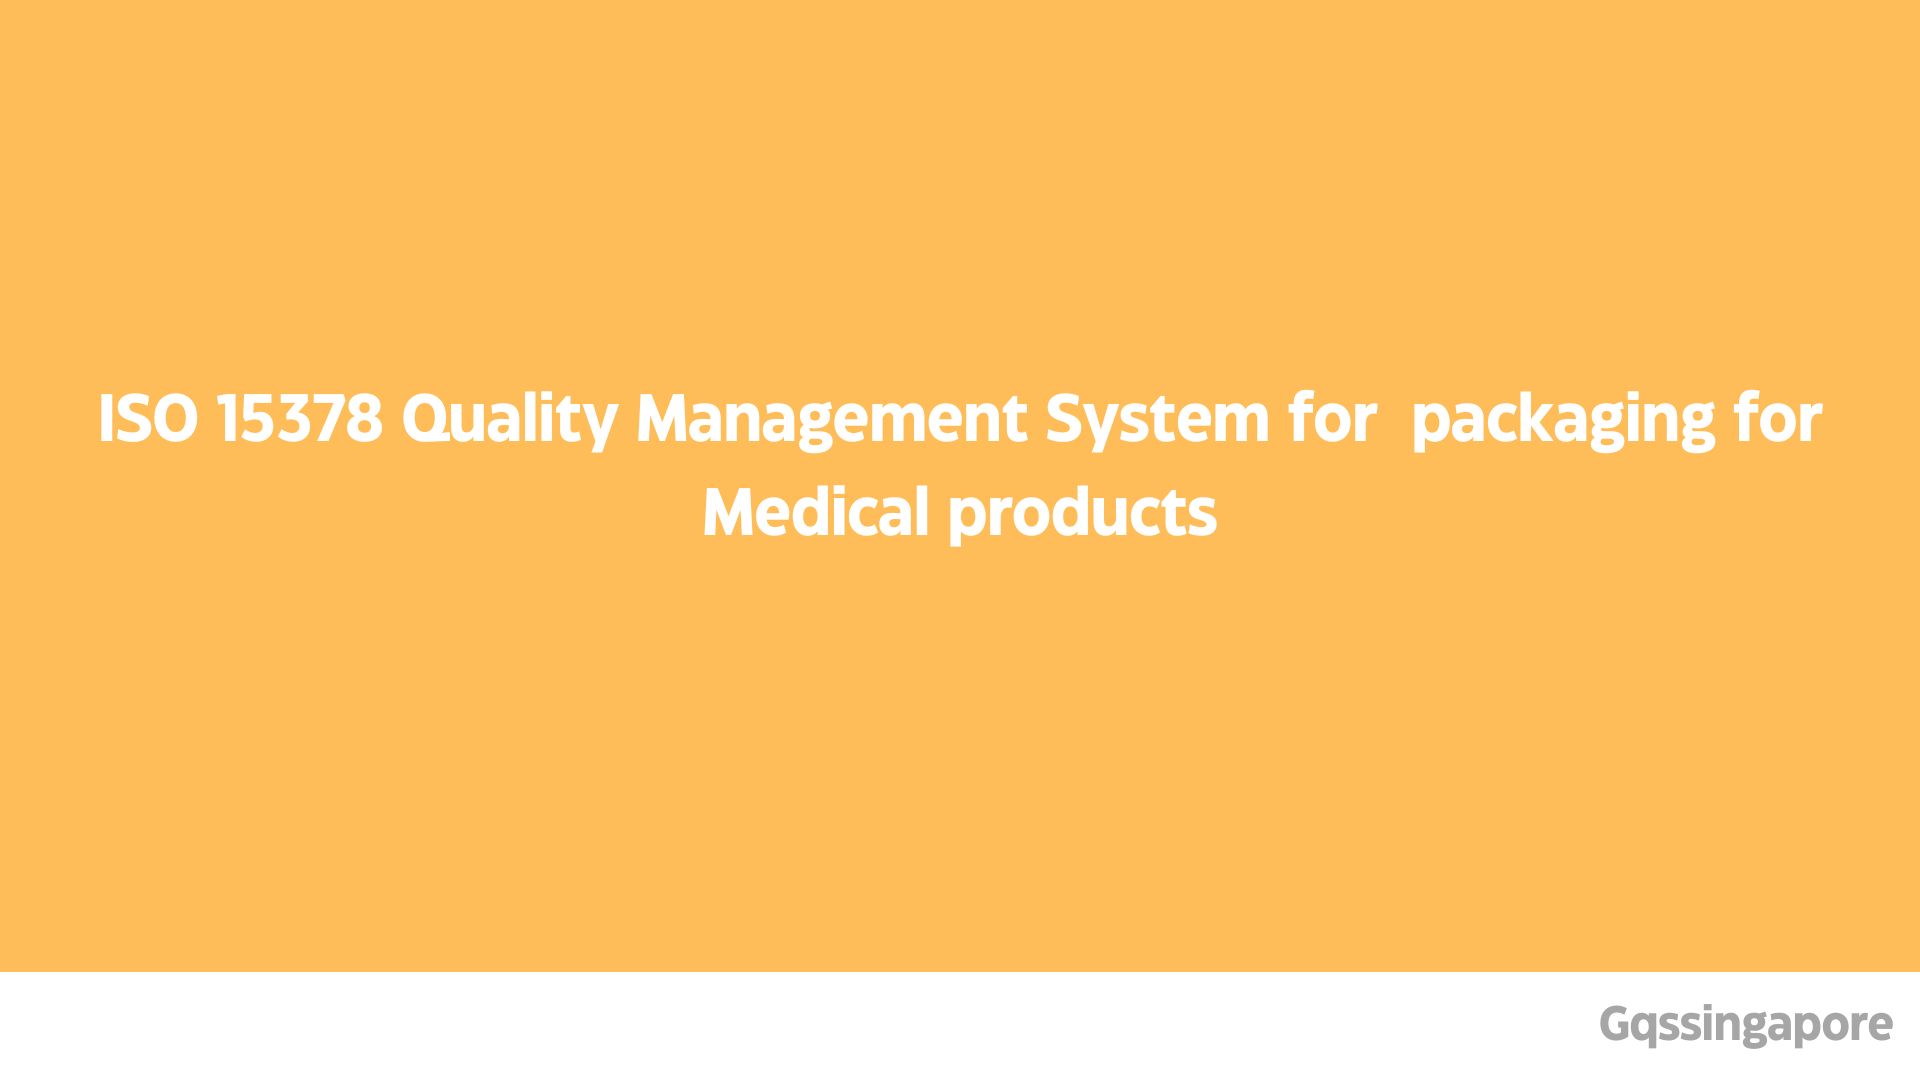 ISO 15378 Quality management system for packaging for medical products